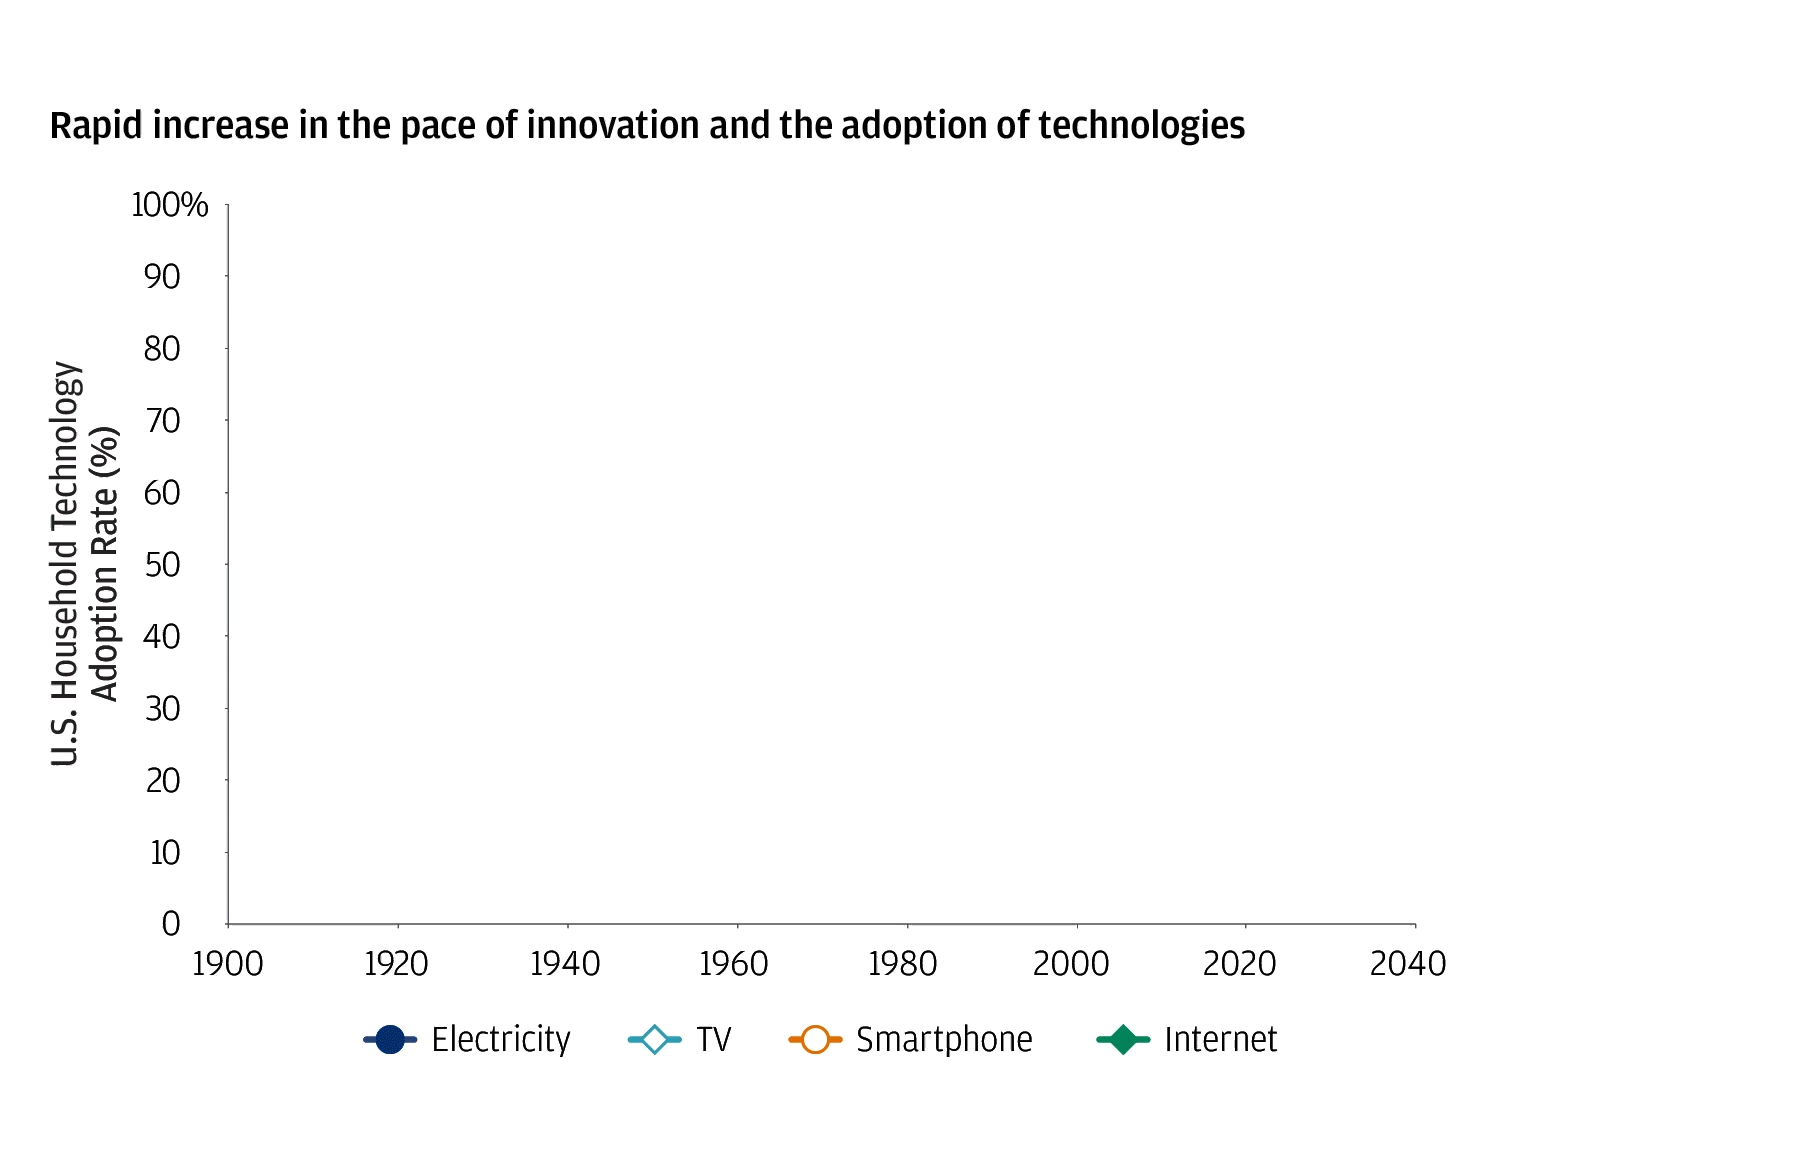 Image showing the pace of innovation and adoption of technology in smartphones, TV, electricity and internet.